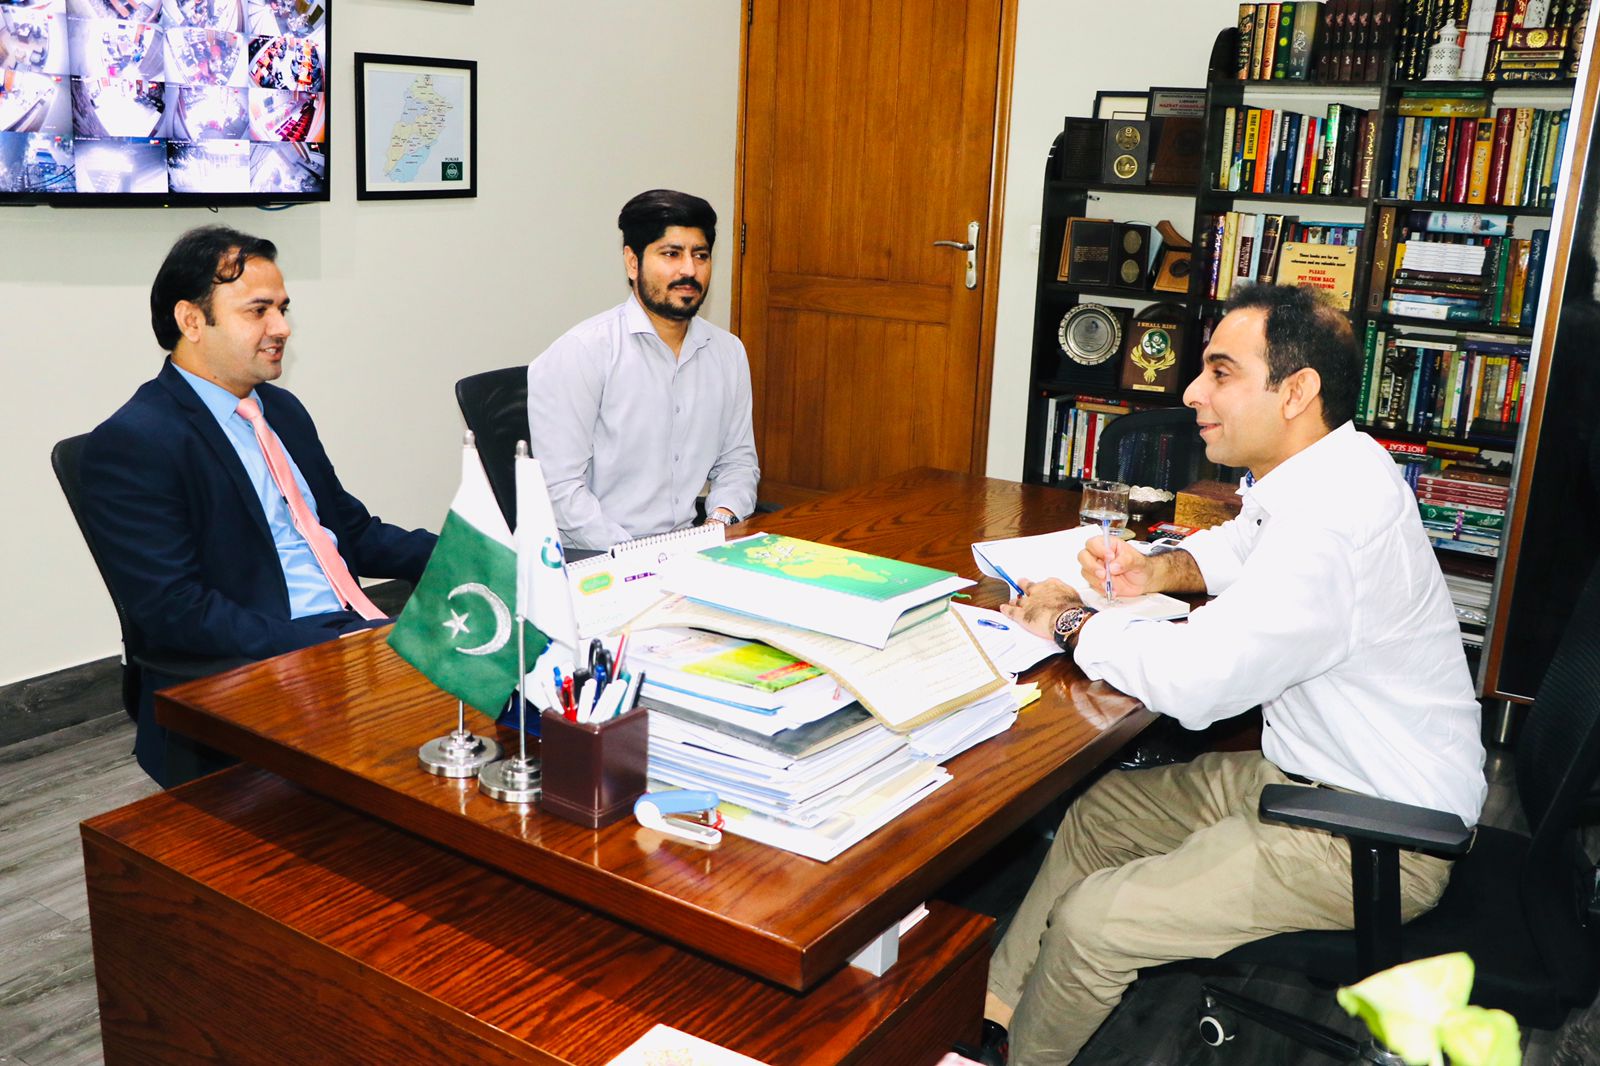 CLO met with Qasim Ali Shah and decided to work together for the promotion of academic integrity in HEIs and capacity-building for the faculty and students